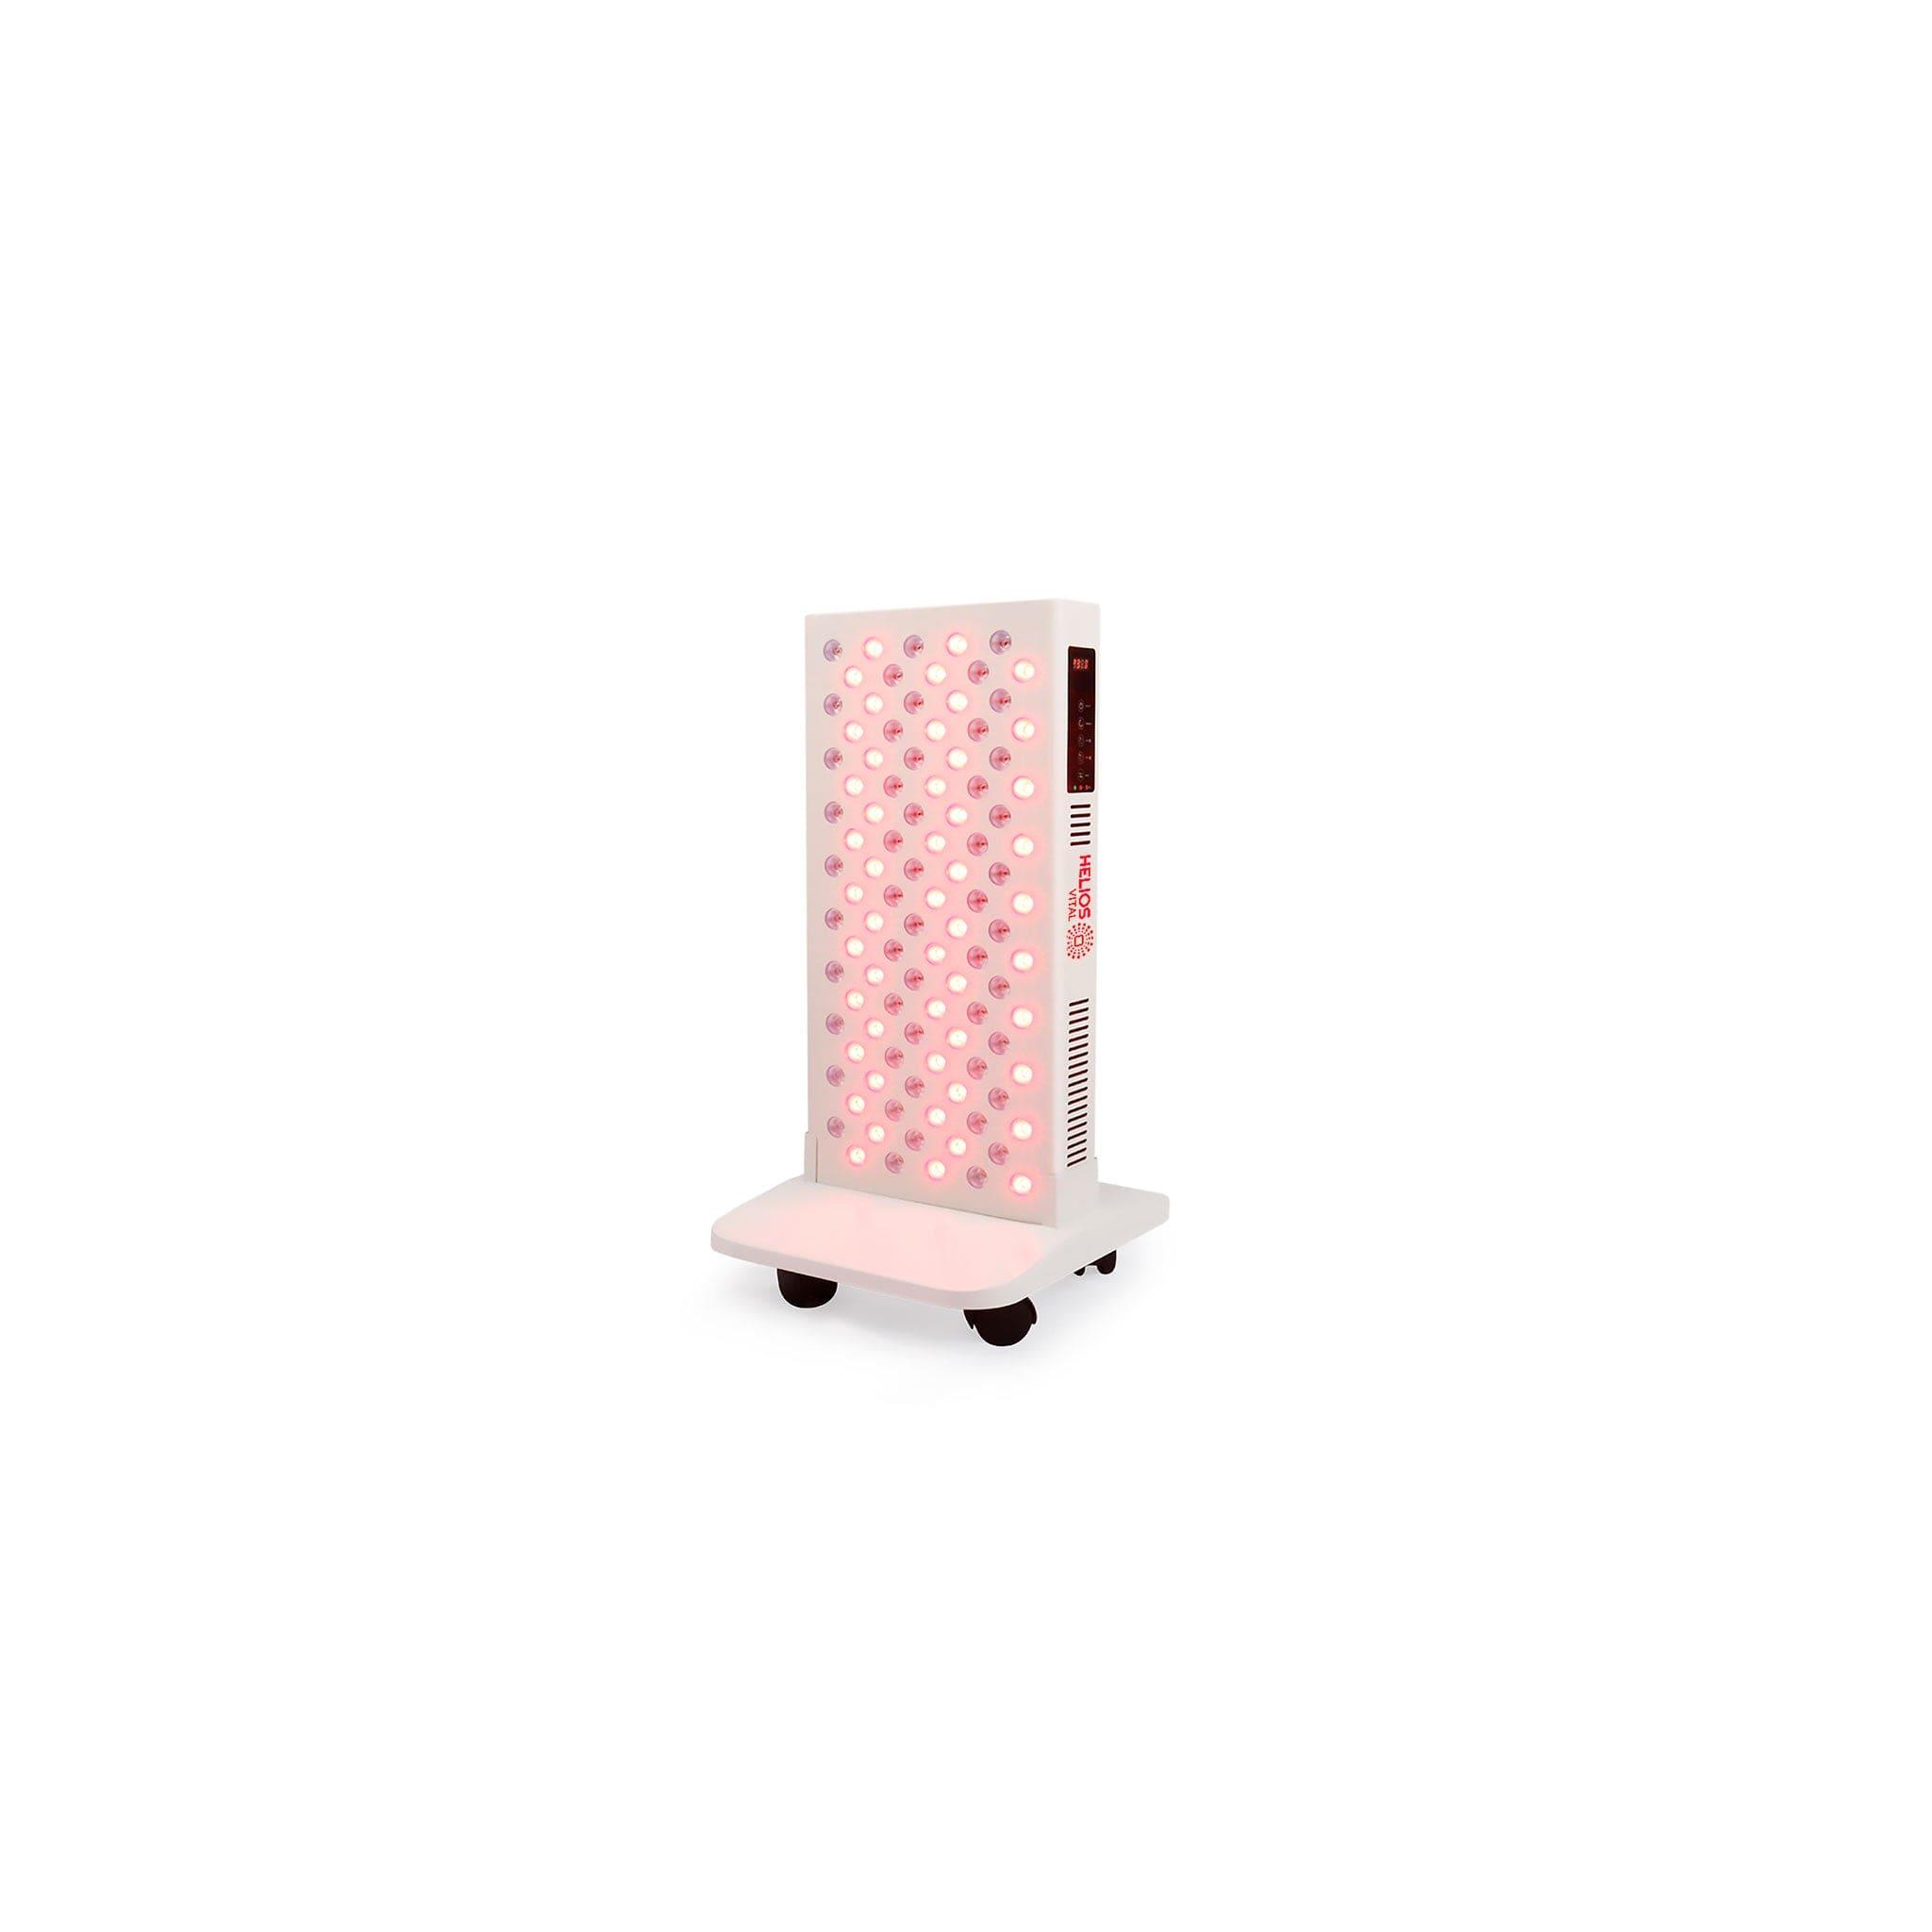  Red Light Therapy Lamp